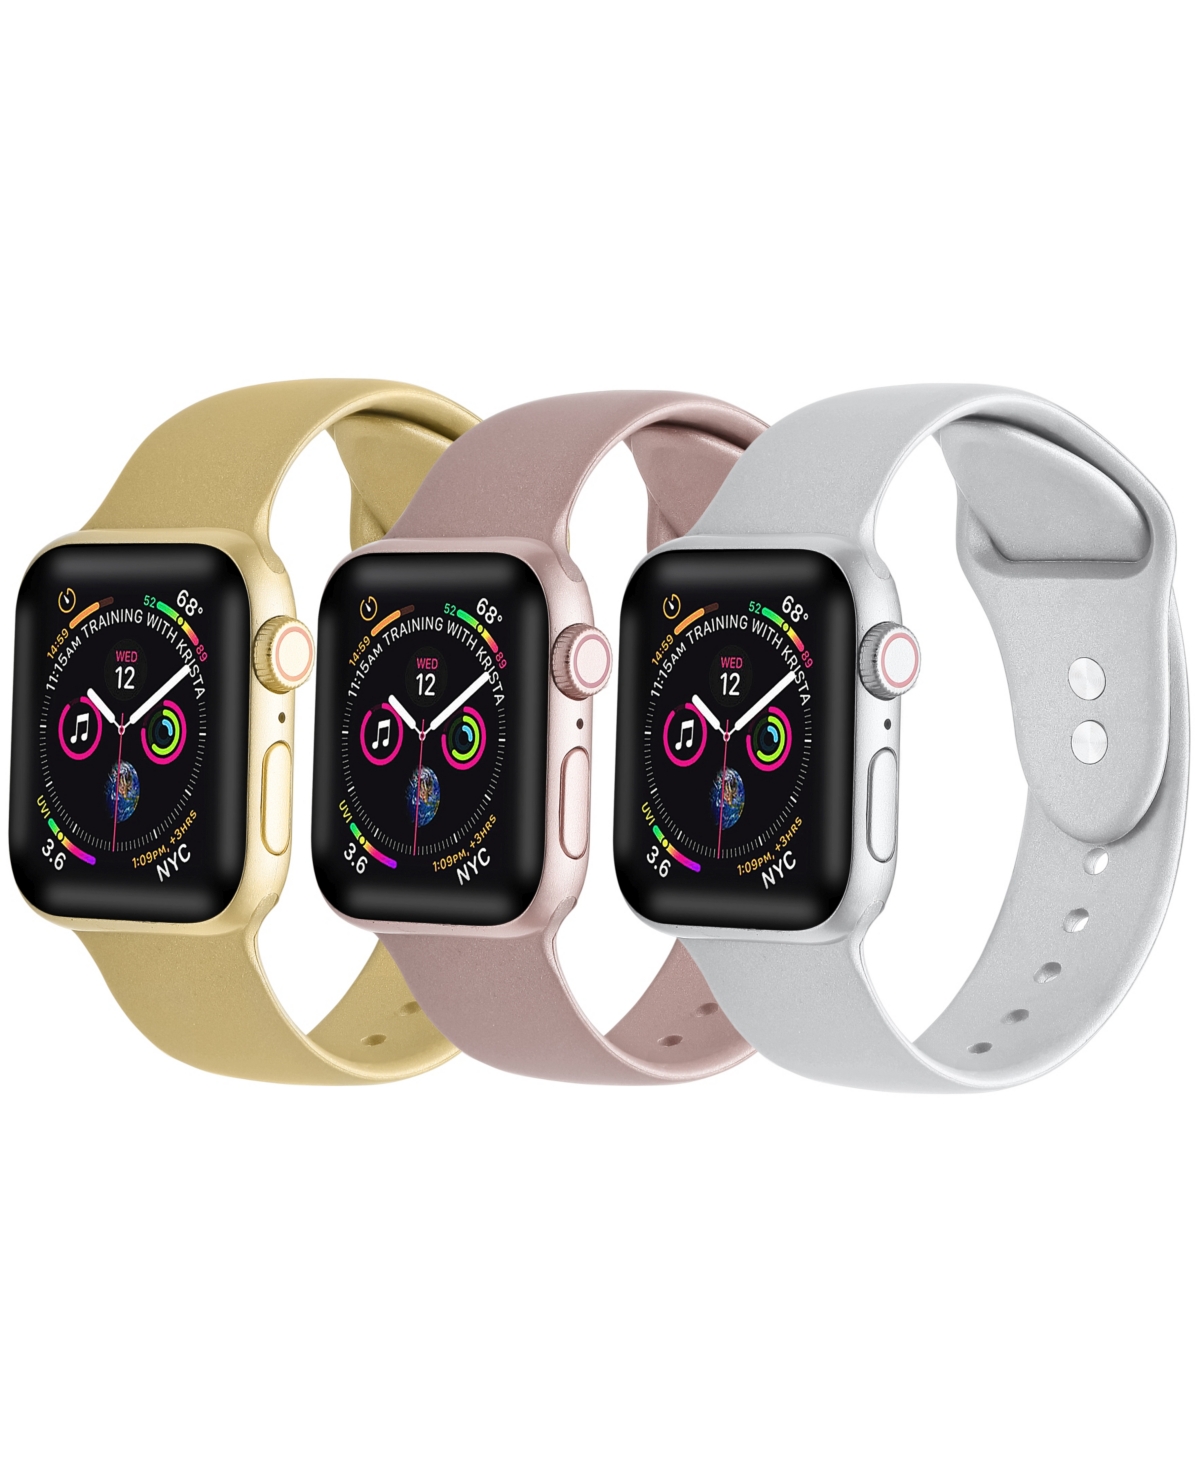 Posh Tech Men's And Women's Rose Gold, Gold-tone Silver-tone Metallic 3 Piece Silicone Band For Apple Watch 38 In Multi